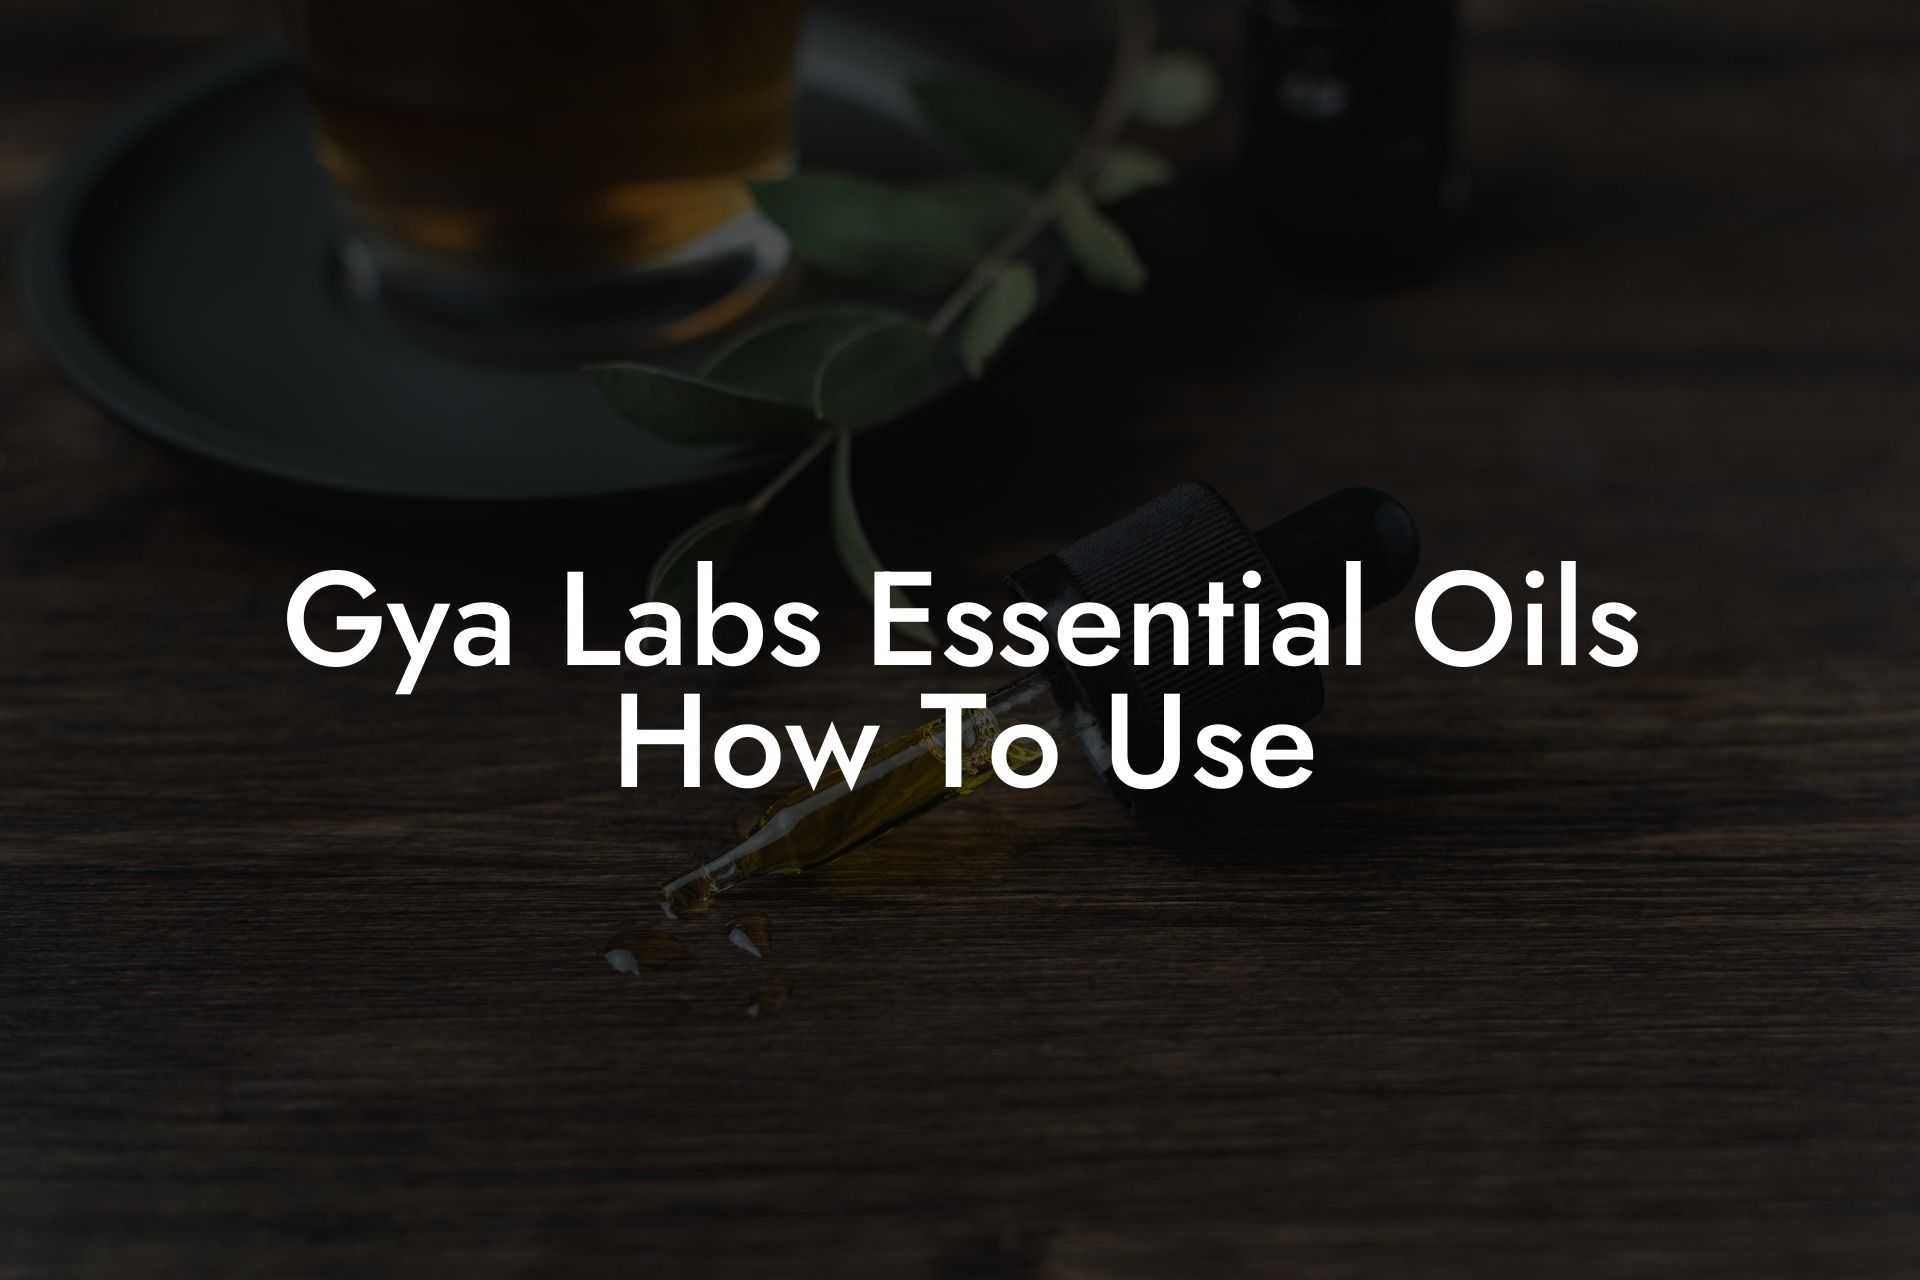 Gya Labs Essential Oils How To Use